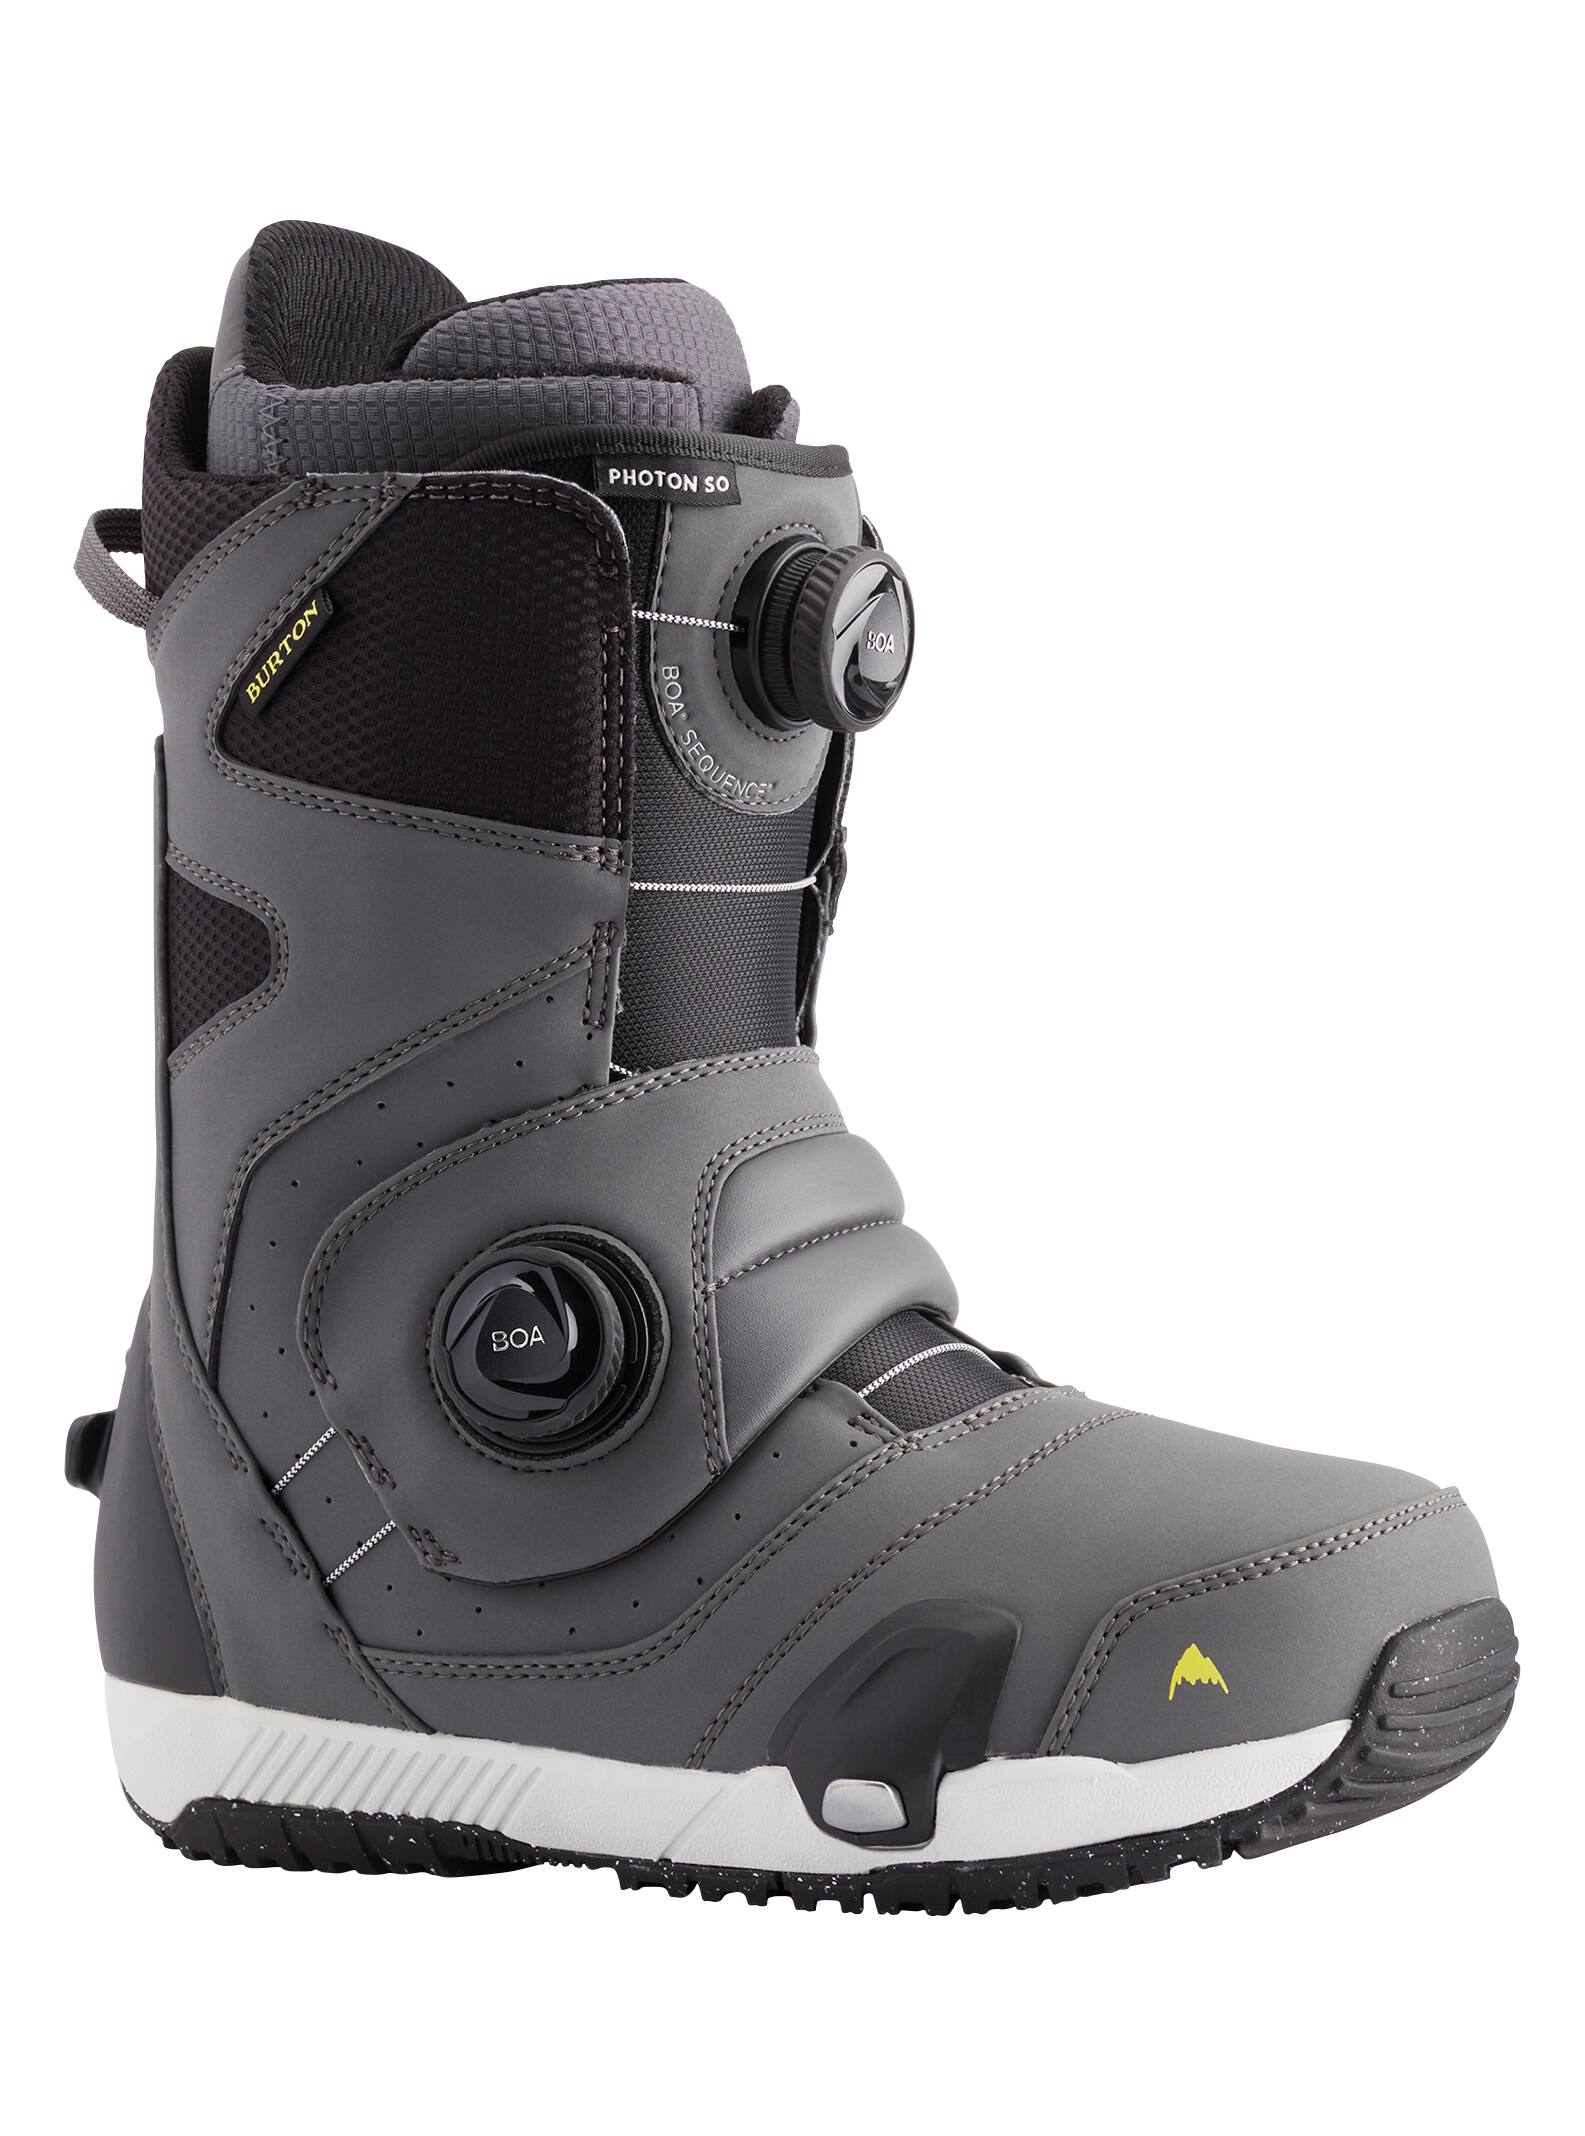 Flow Burst 159 Wide Mens Complete Snowboard Package Bindings DC Phase Boots